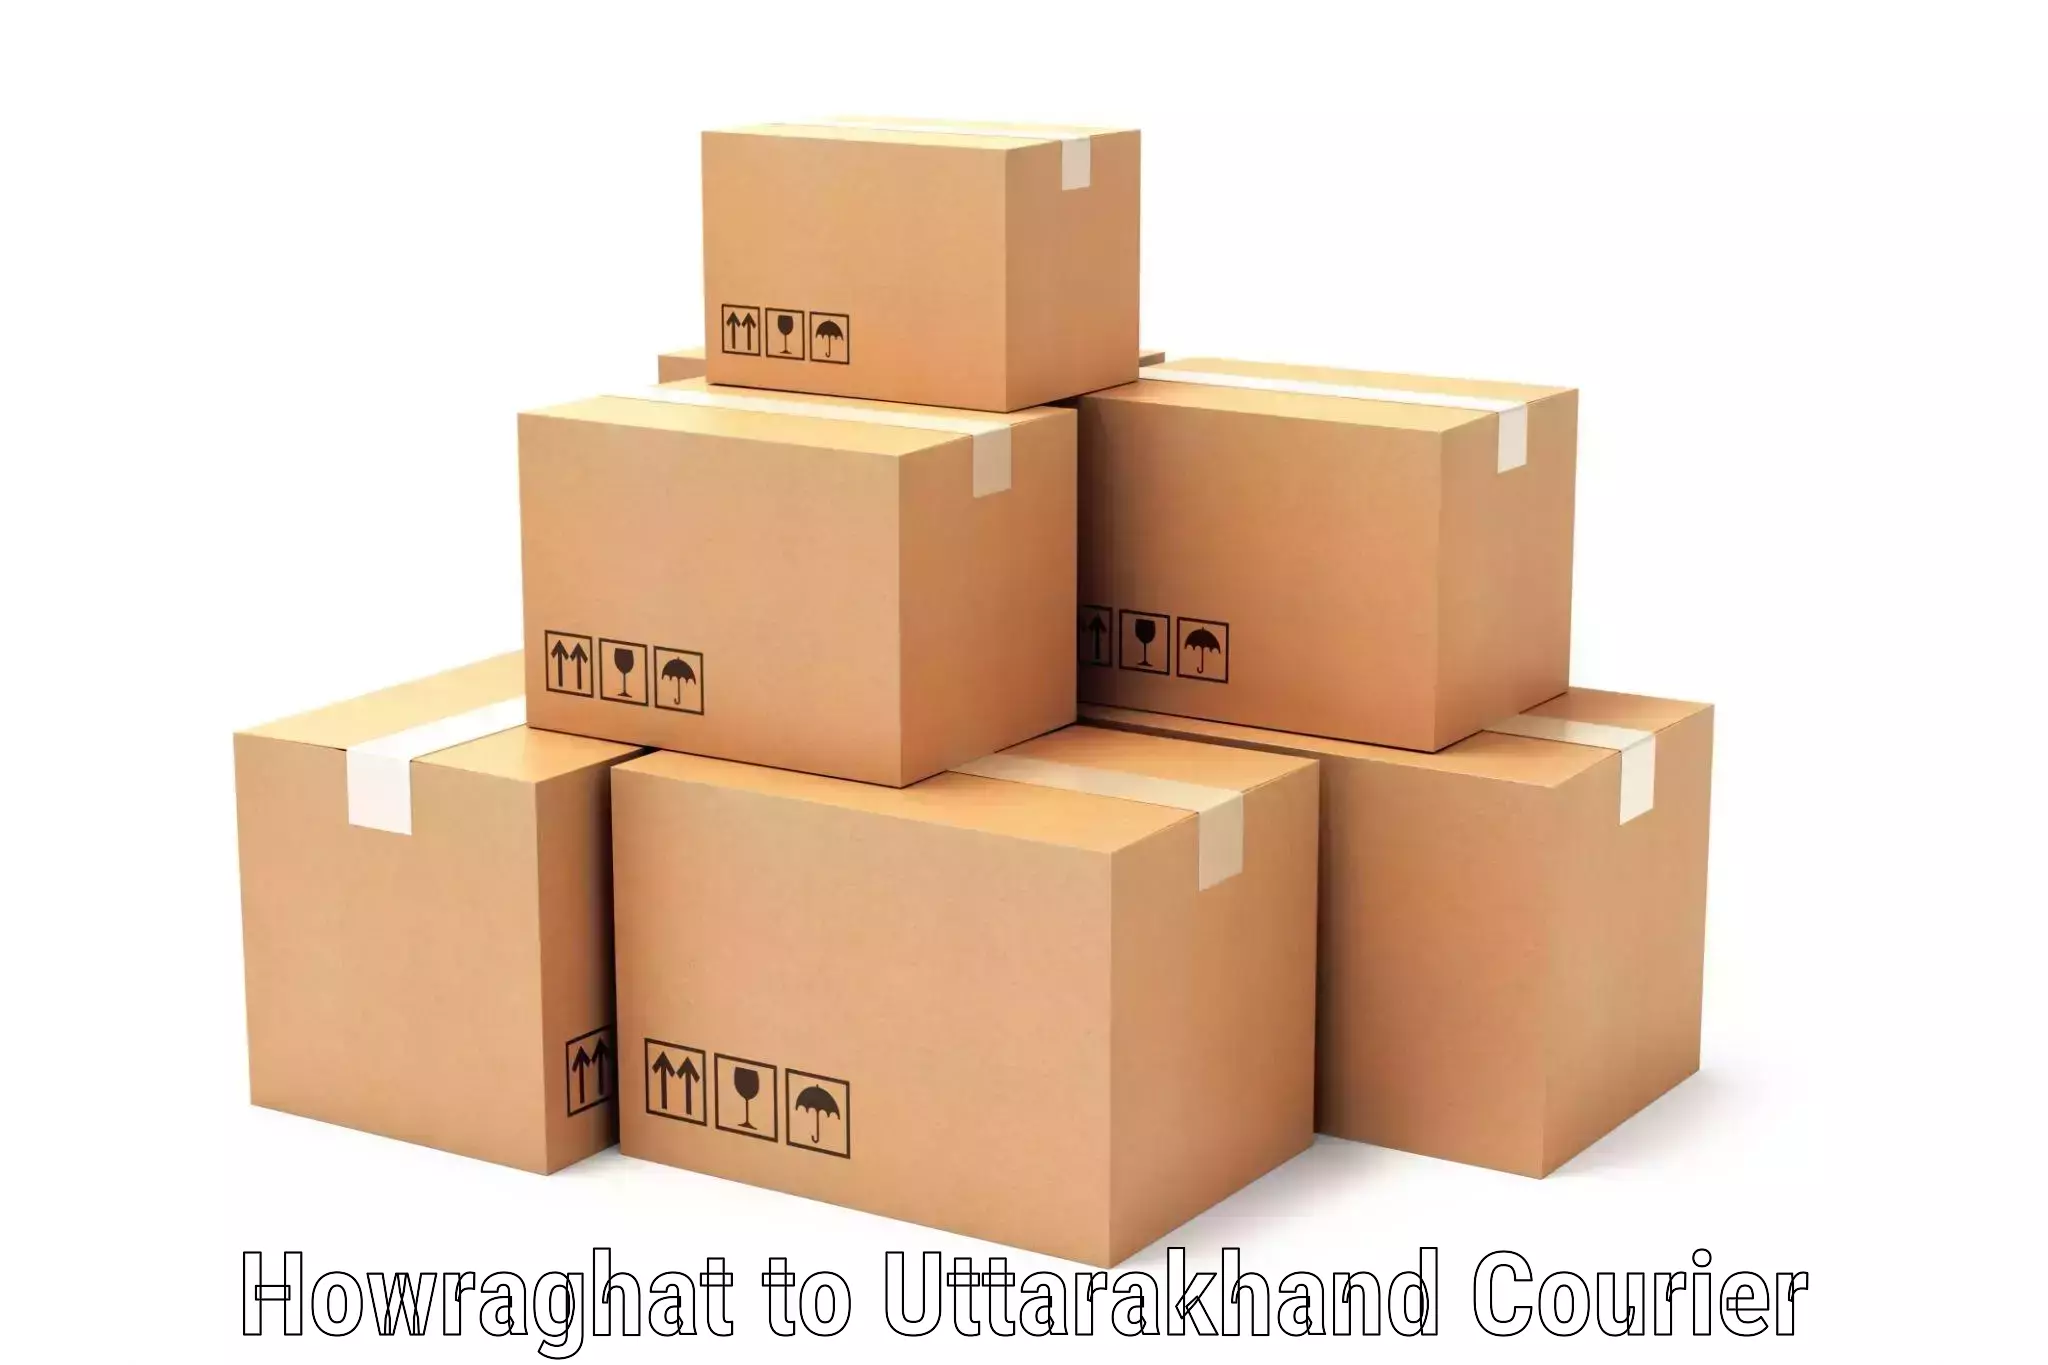 Efficient package consolidation Howraghat to Rudrapur